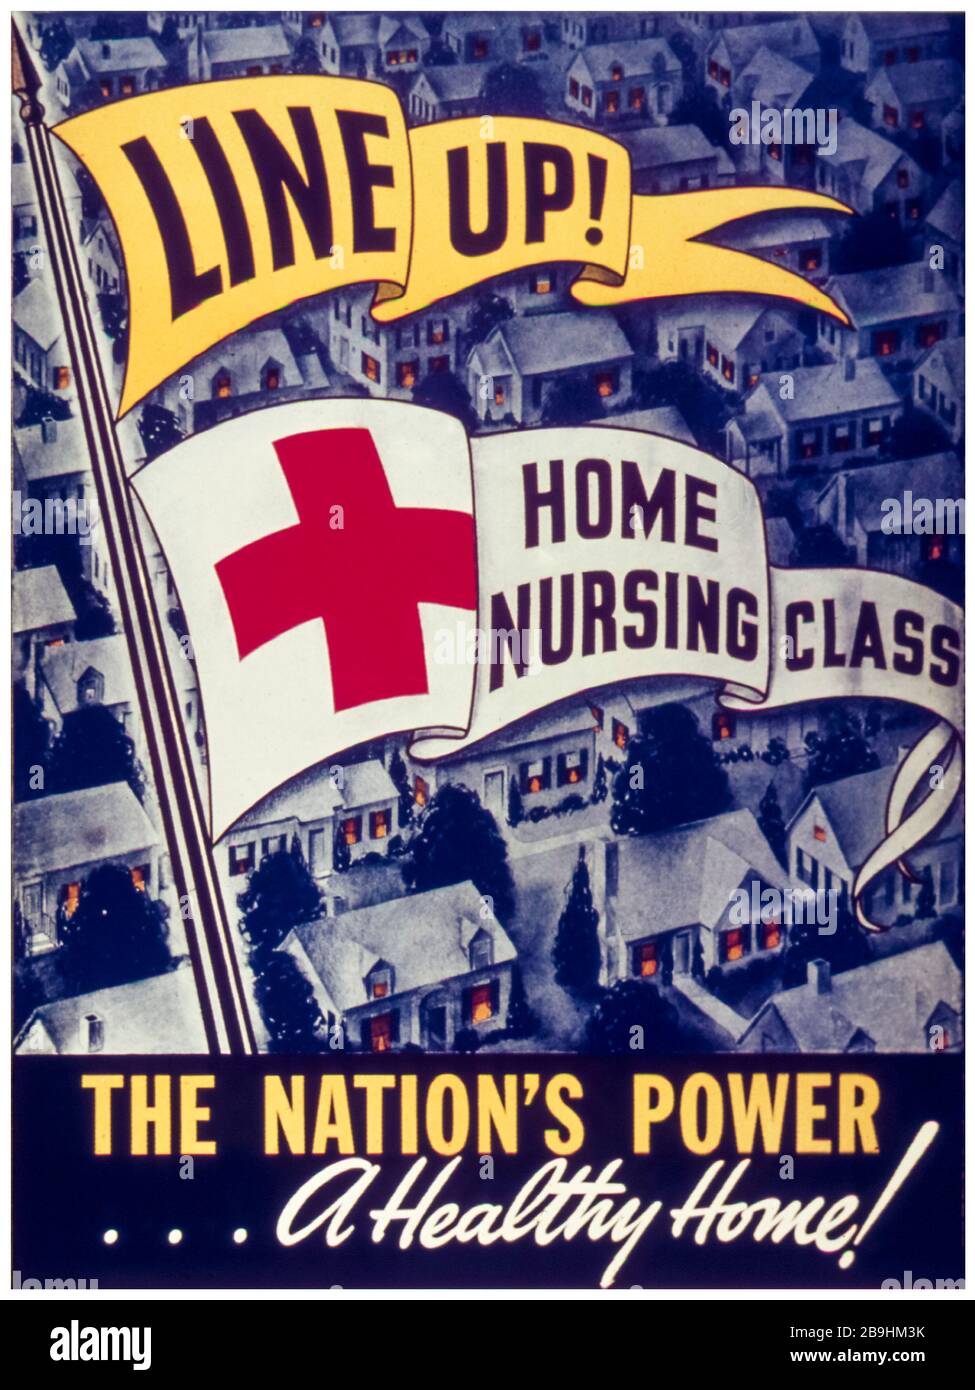 American WW2 home nursing class campaign poster, Line up: Home Nursing Class, The Nation's Power, A Healthy Home, 1941-1945 Stock Photo